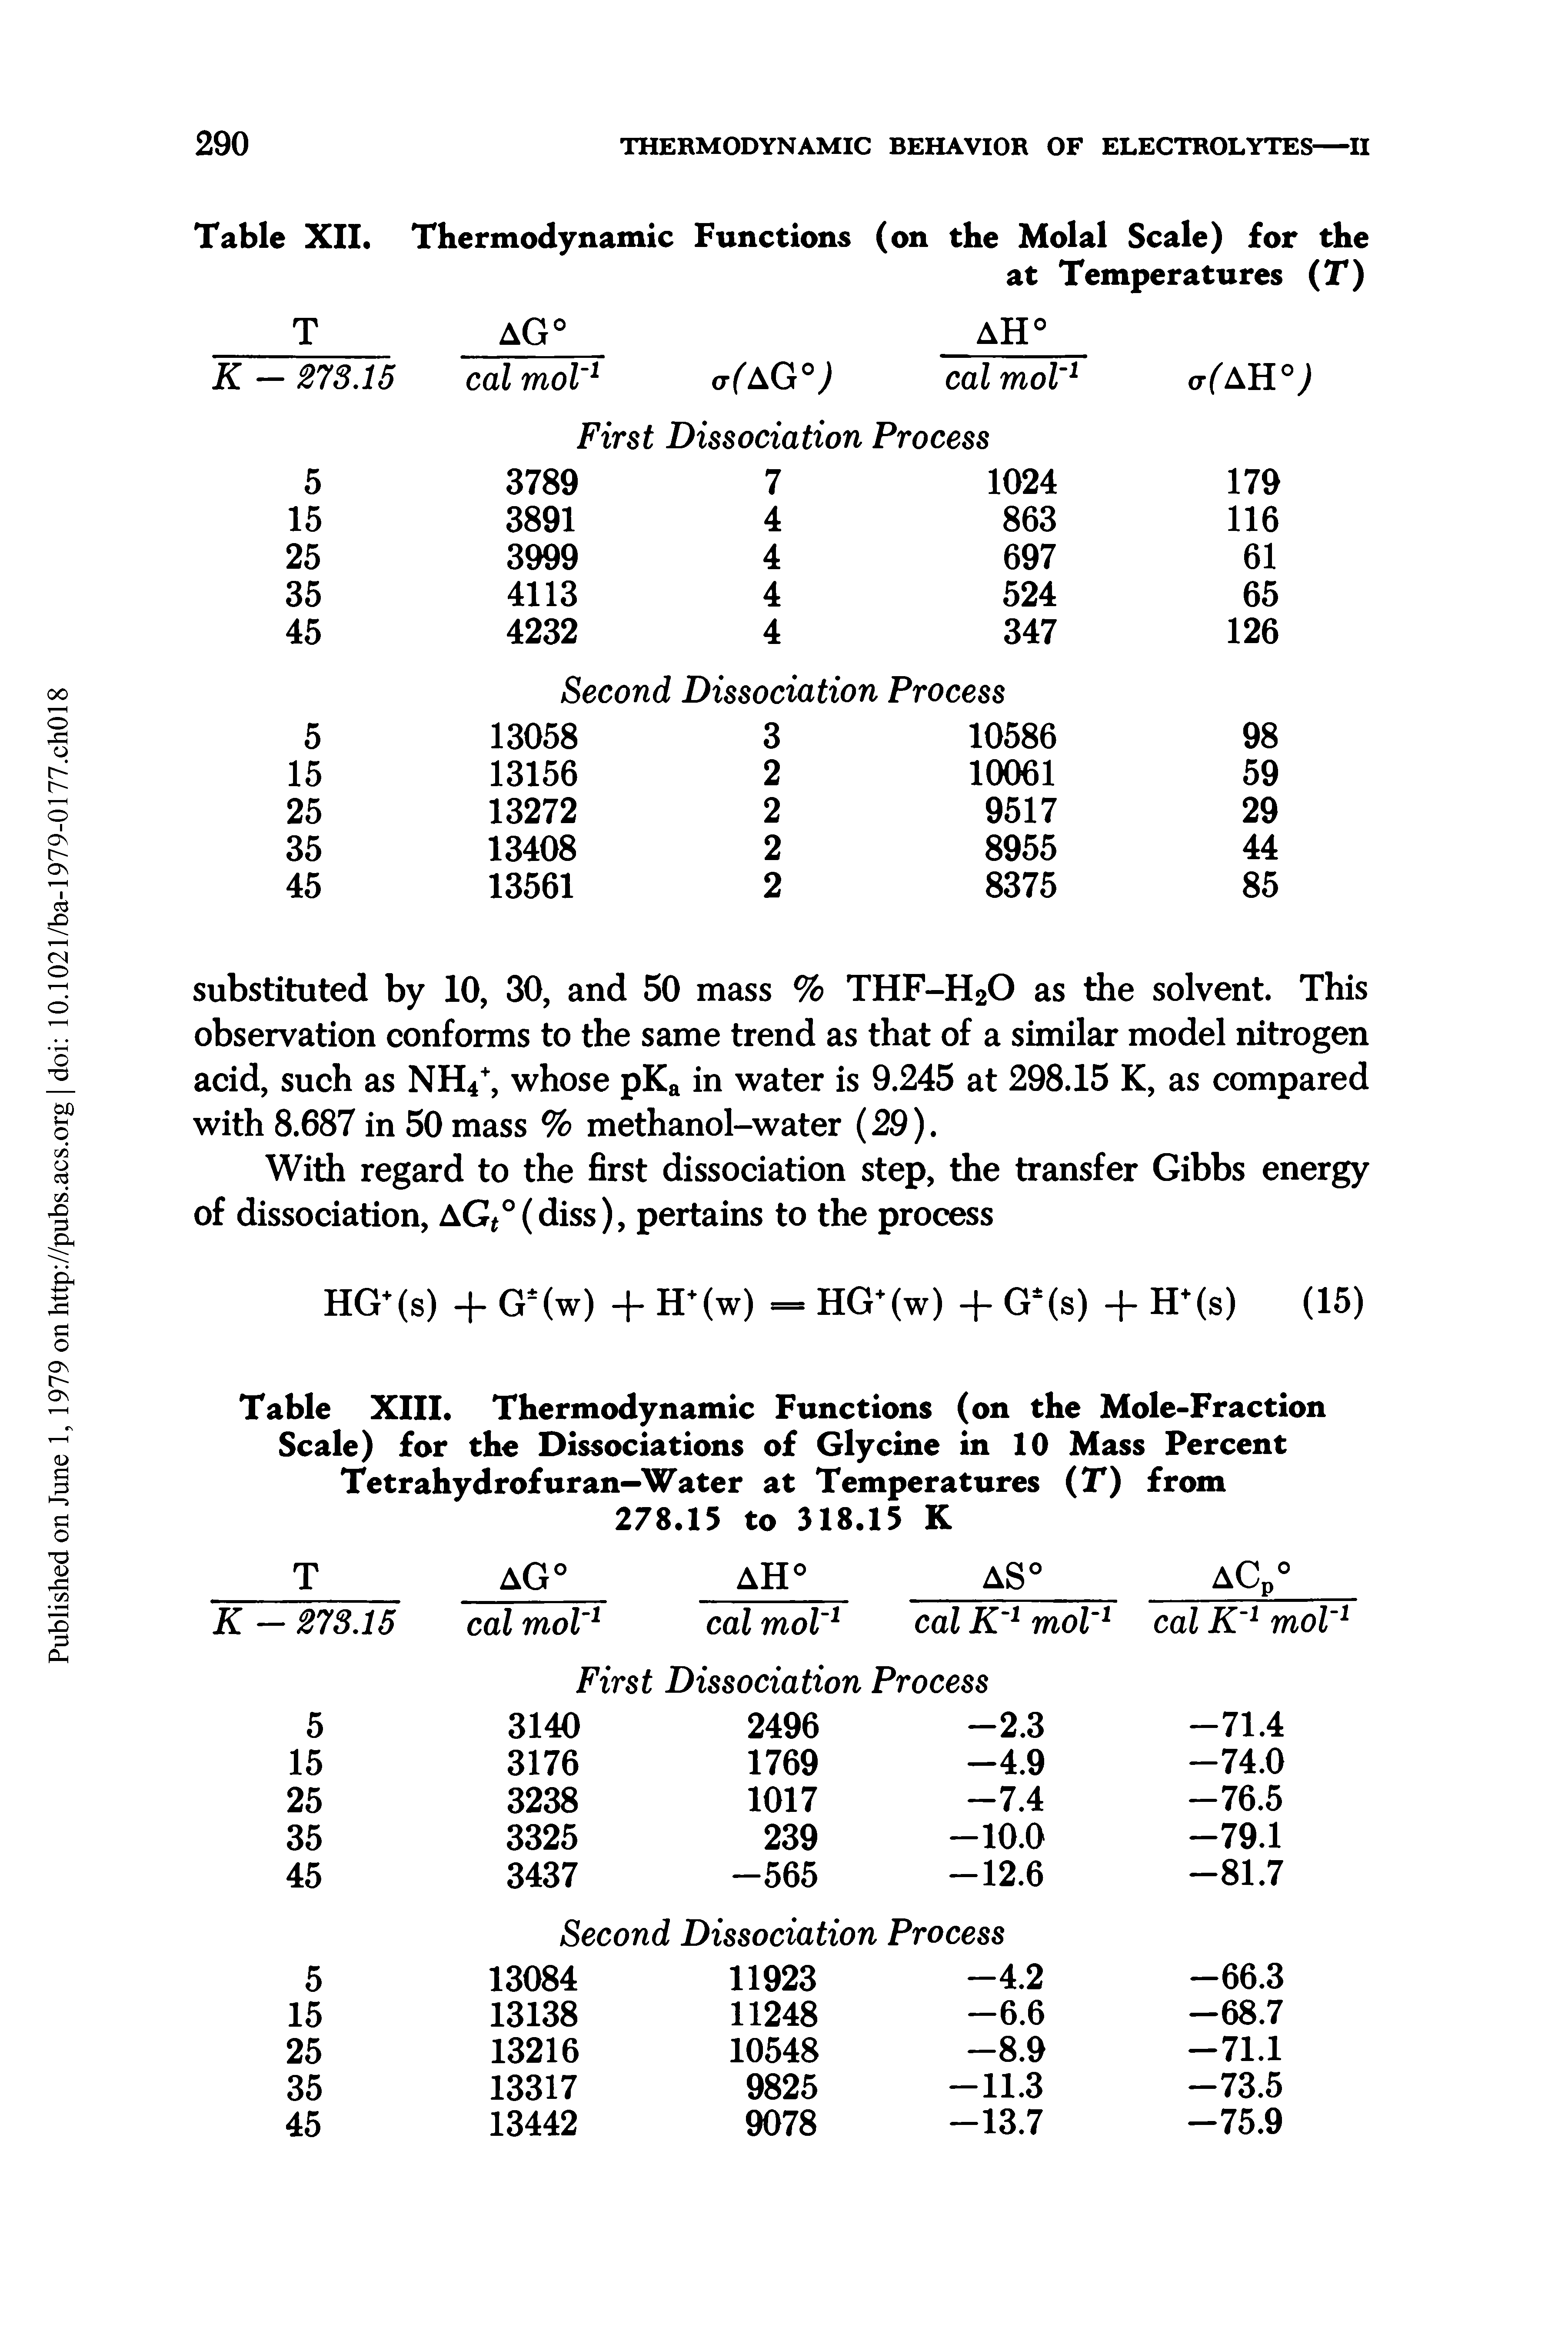 Table XIII. Thermodynamic Functions (on the Mole-Fraction Scale) for the Dissociations of Glycine in 10 Mass Percent Tetrahydrofuran—Water at Temperatures (T) from 278.15 to 318.15 K...